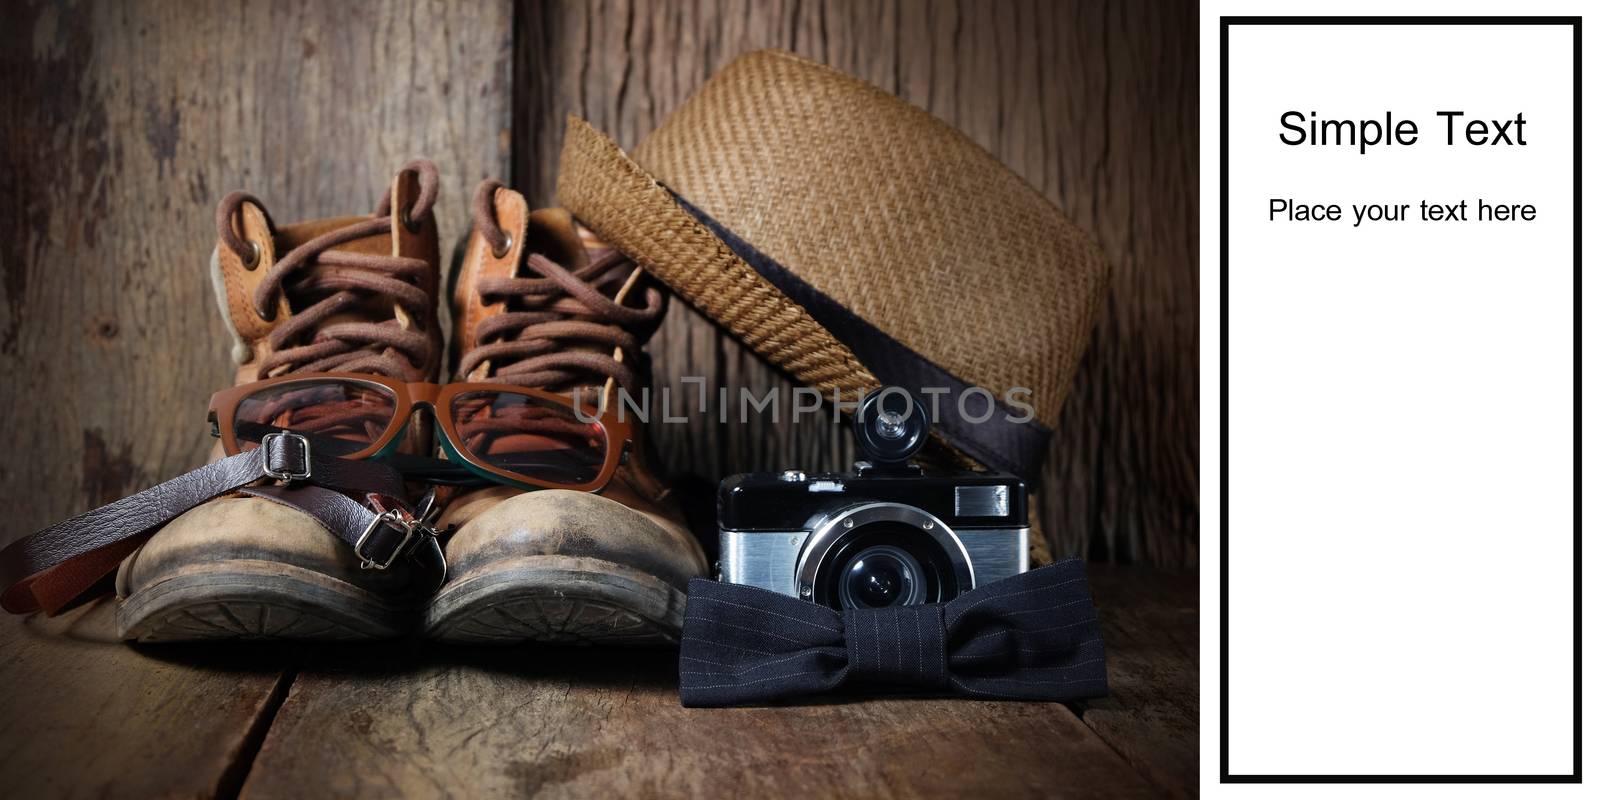 Shoe hat and accessories travel set on a wooden background and space for text

